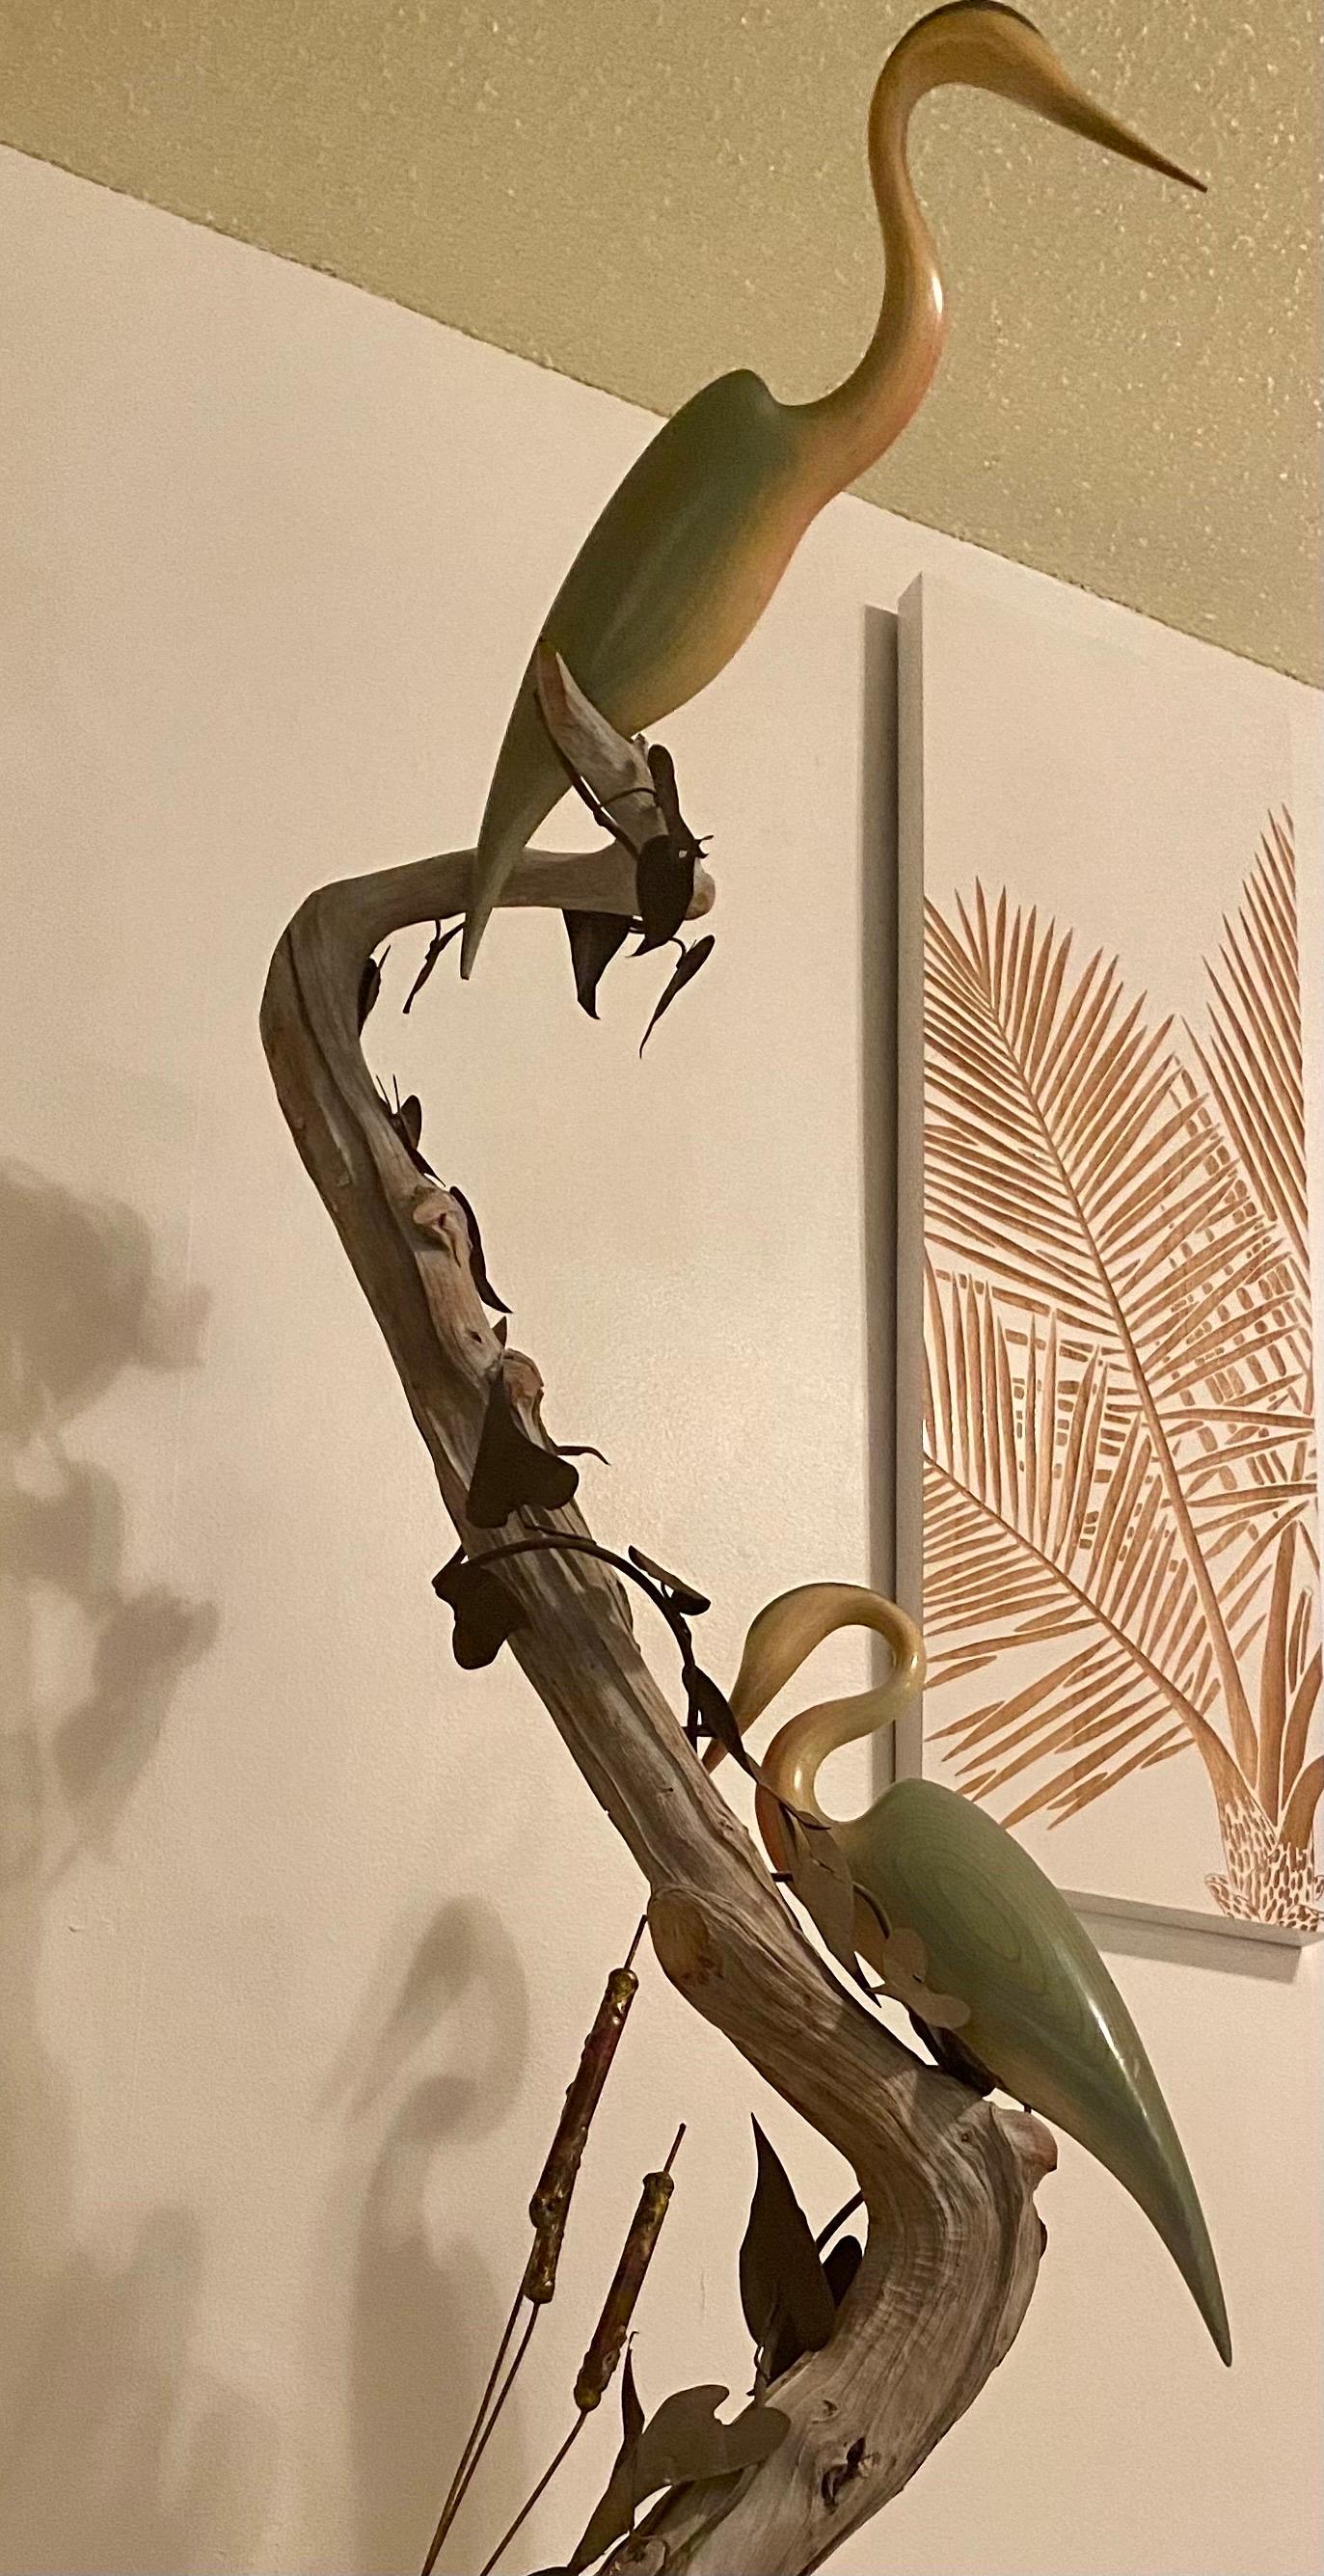 A unique and organic sculpture using driftwood intertwined with oxidized metal leaves and cattails. There are two hand carved birds perching on the wood. The sculpture is in wonderful condition and bring a beach vibe into any space.